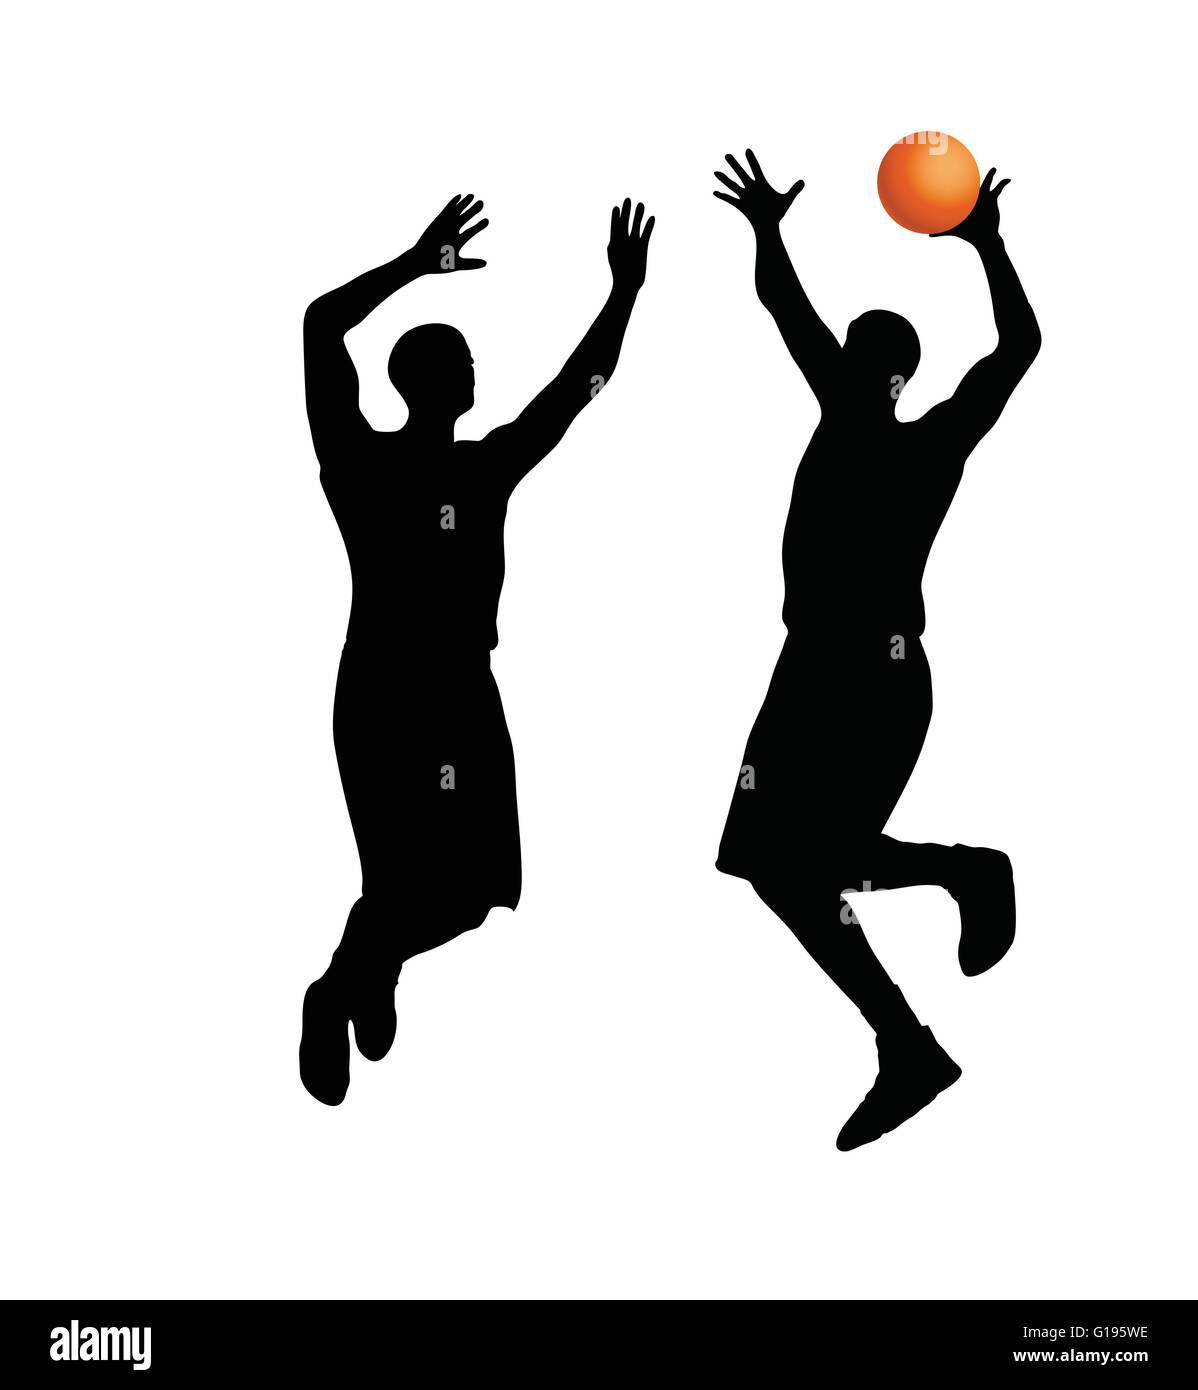 Vector Image - basketball player man silhouette isolated on white background Stock Vector